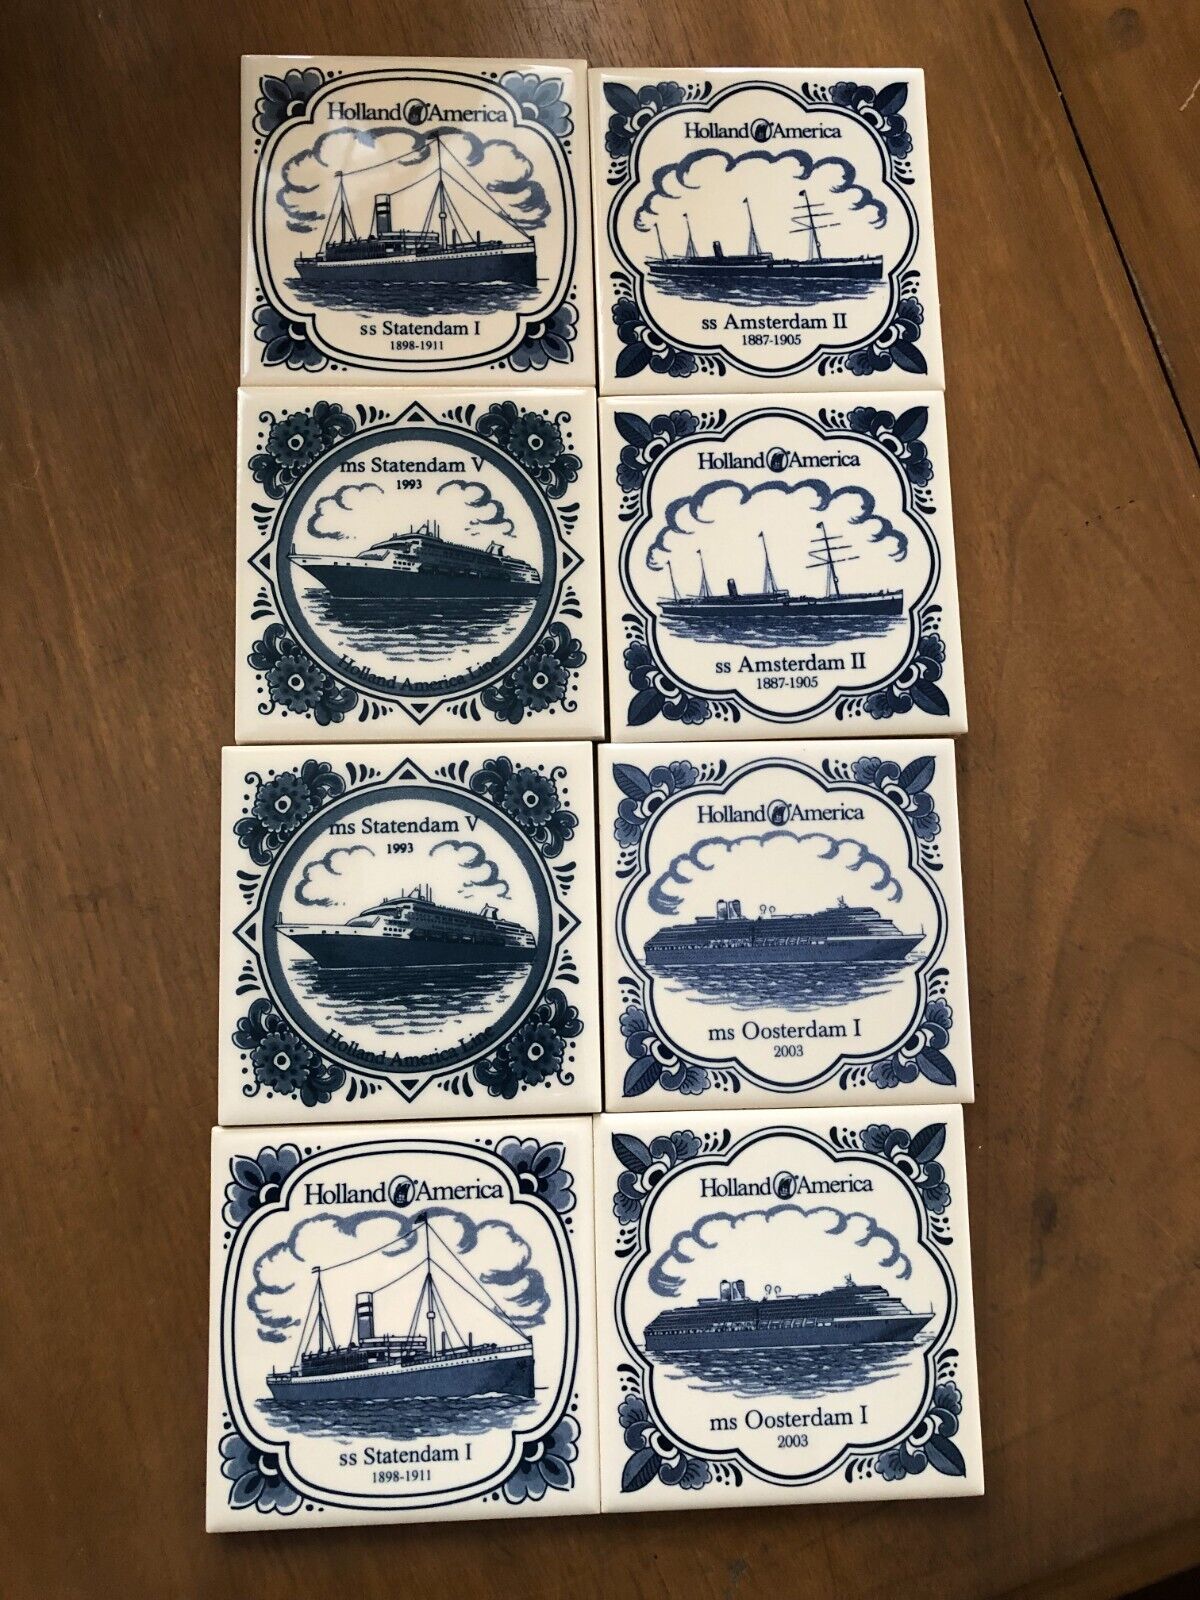 Holland America Cruise Line Delft Tiles 4" Cork Back Coasters - Lot Of 8